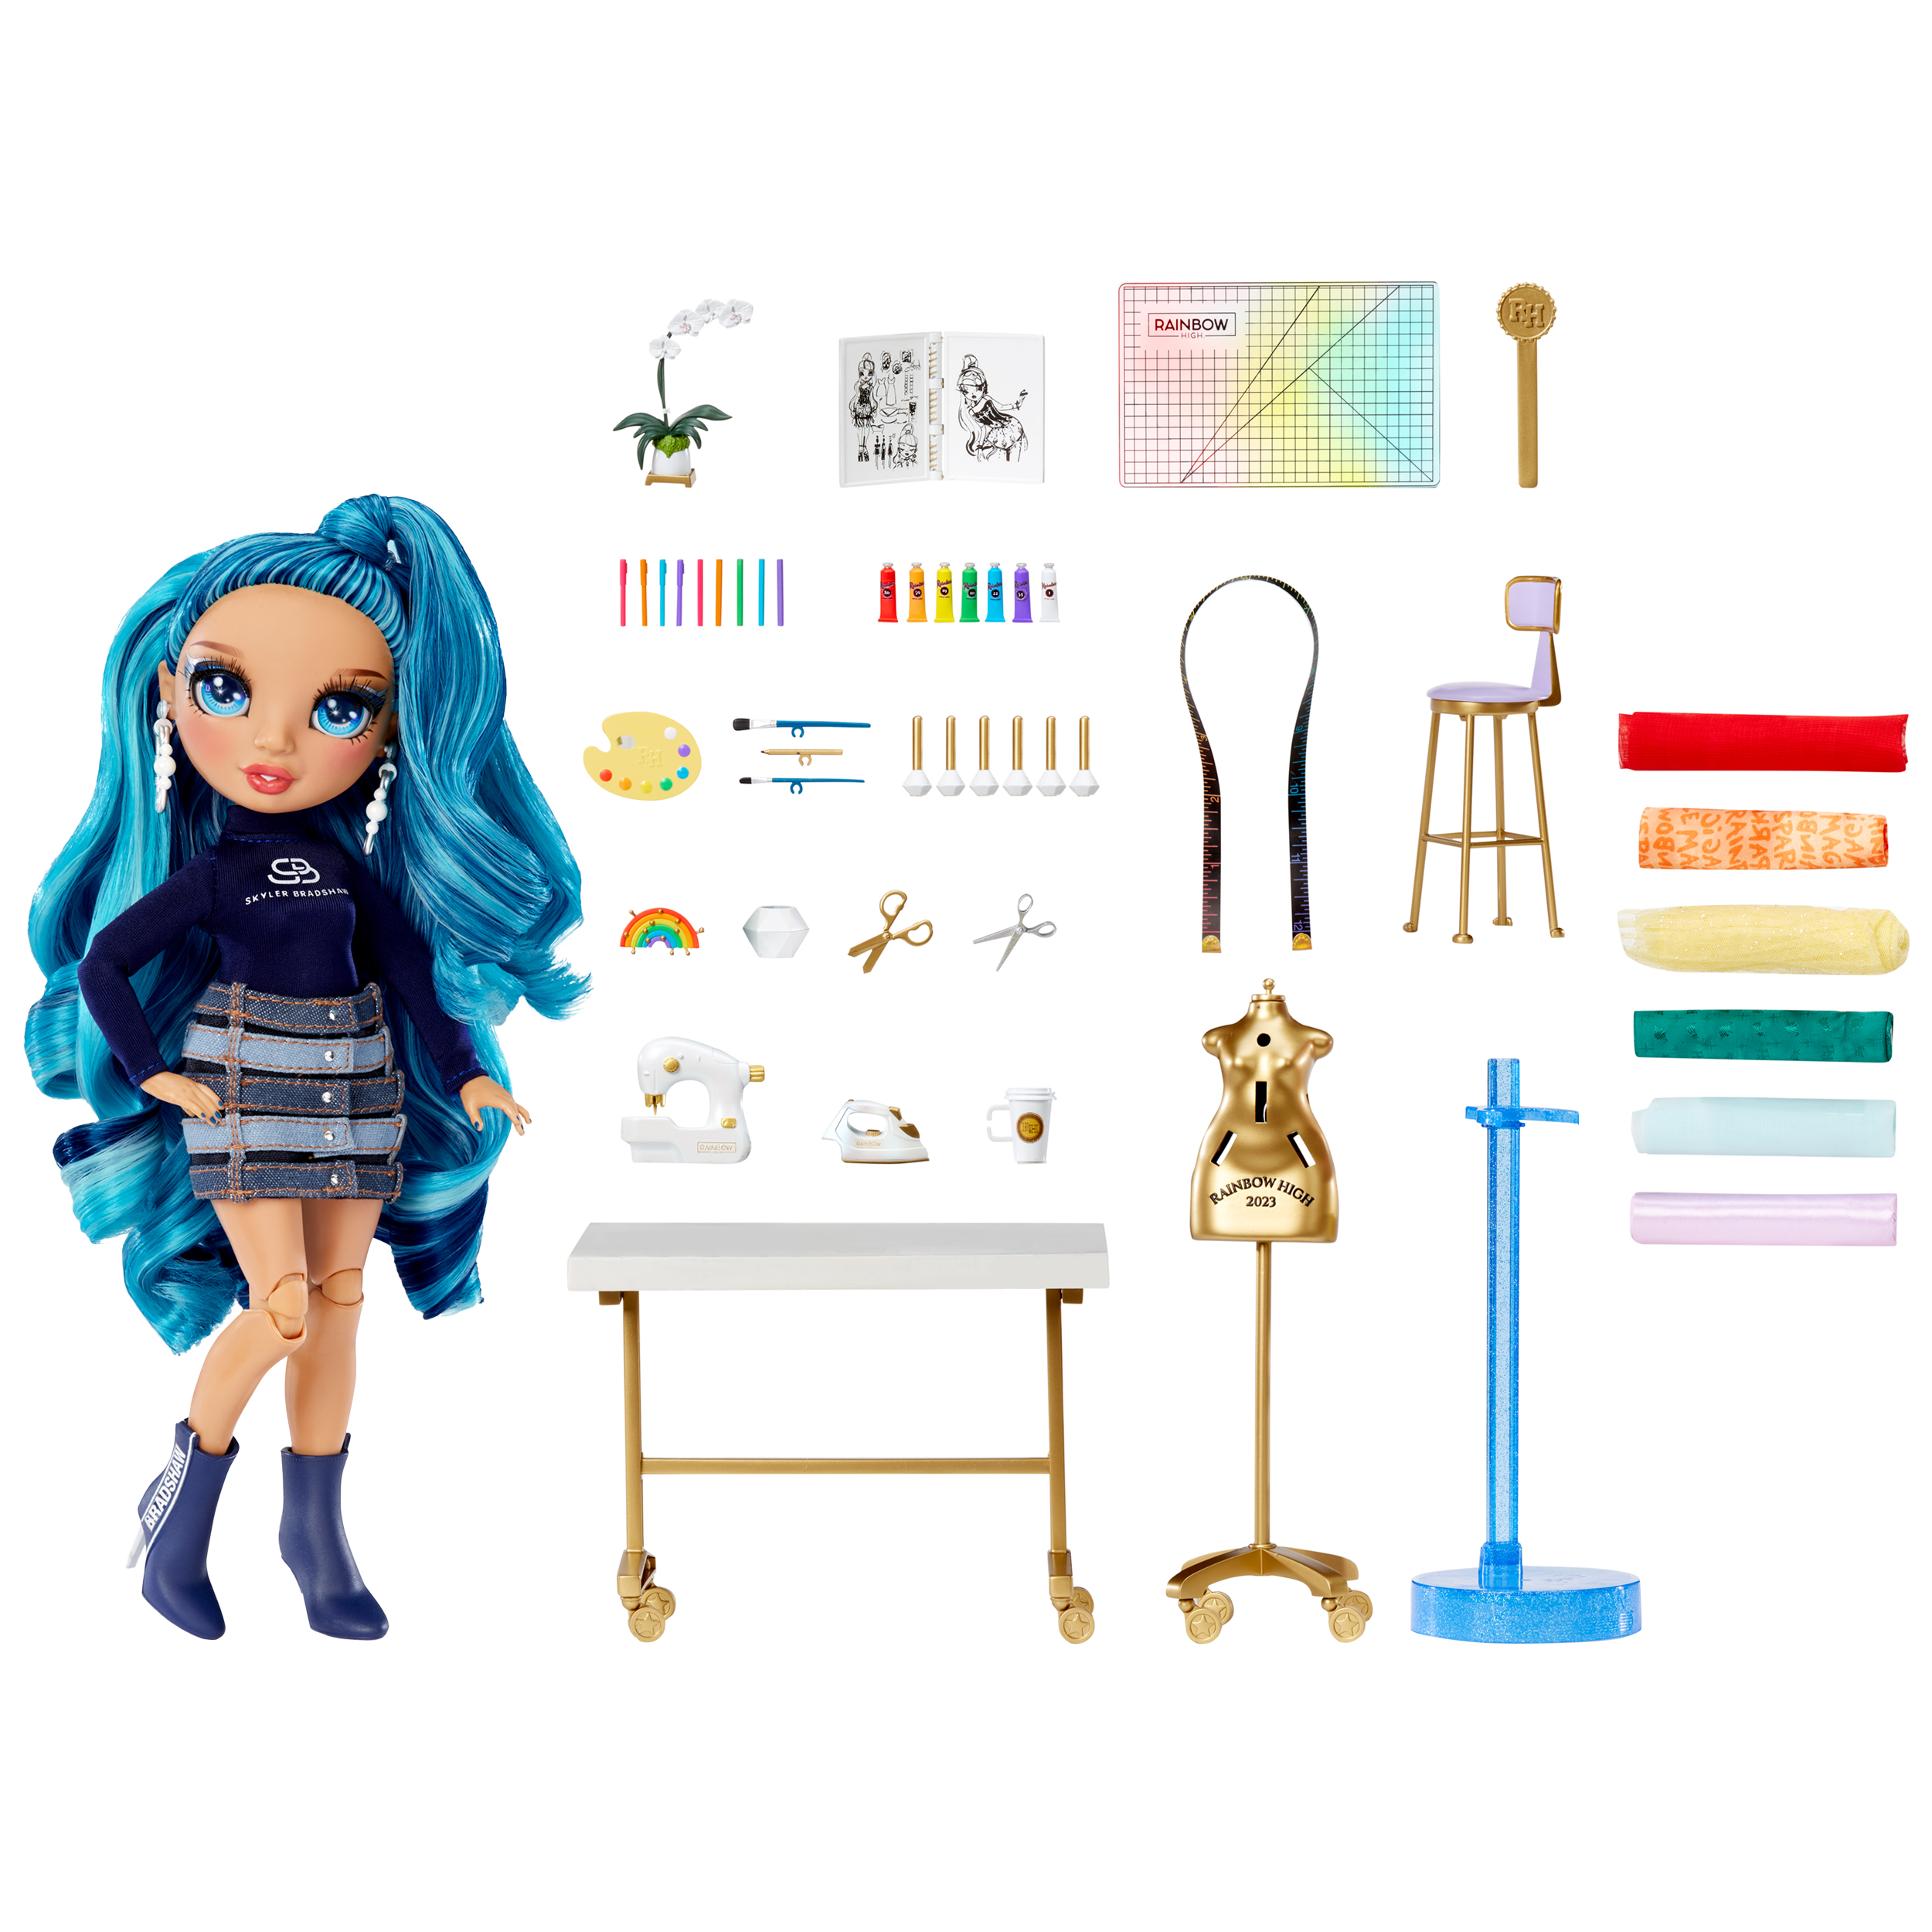 Rainbow High Dream & Design Fashion Studio, Designer Playset with Collectible Blue Skyler Doll +Easy No Sew Fashion Kit Kids Toy Gift 4-12 - image 5 of 8